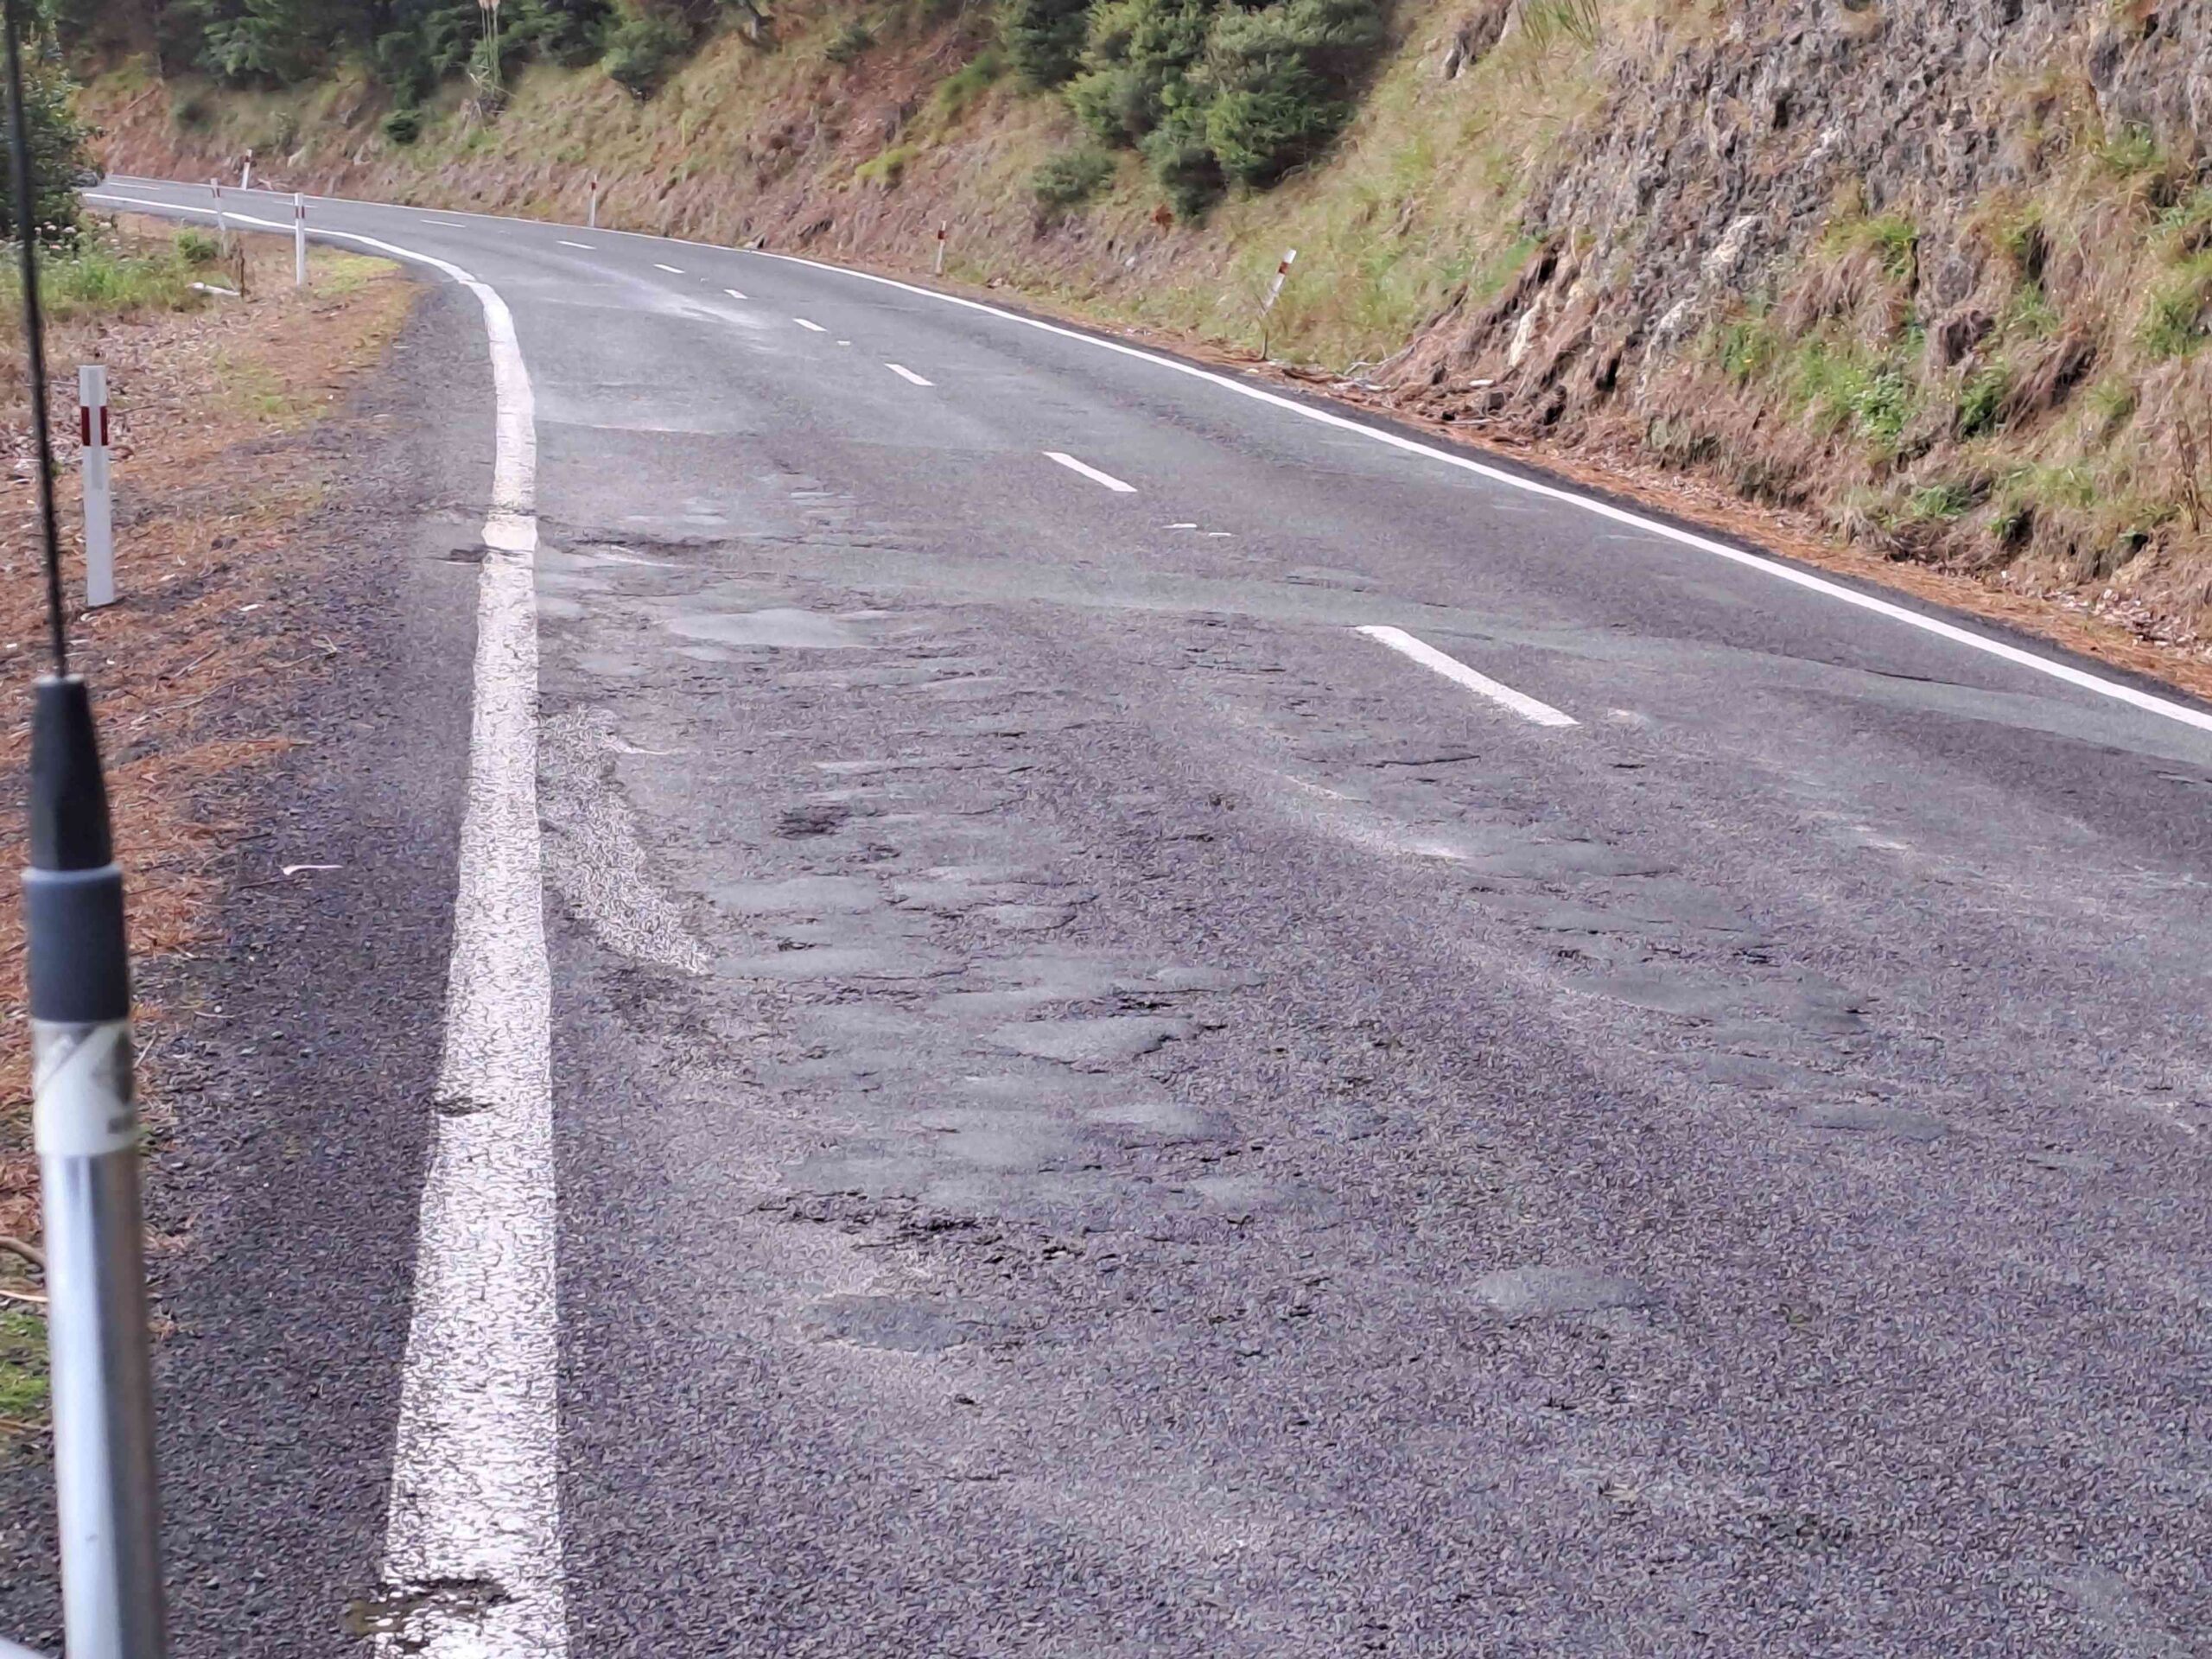 You are currently viewing SH25 Kereta Hill, Coromandel overnight closures for urgent road repairs